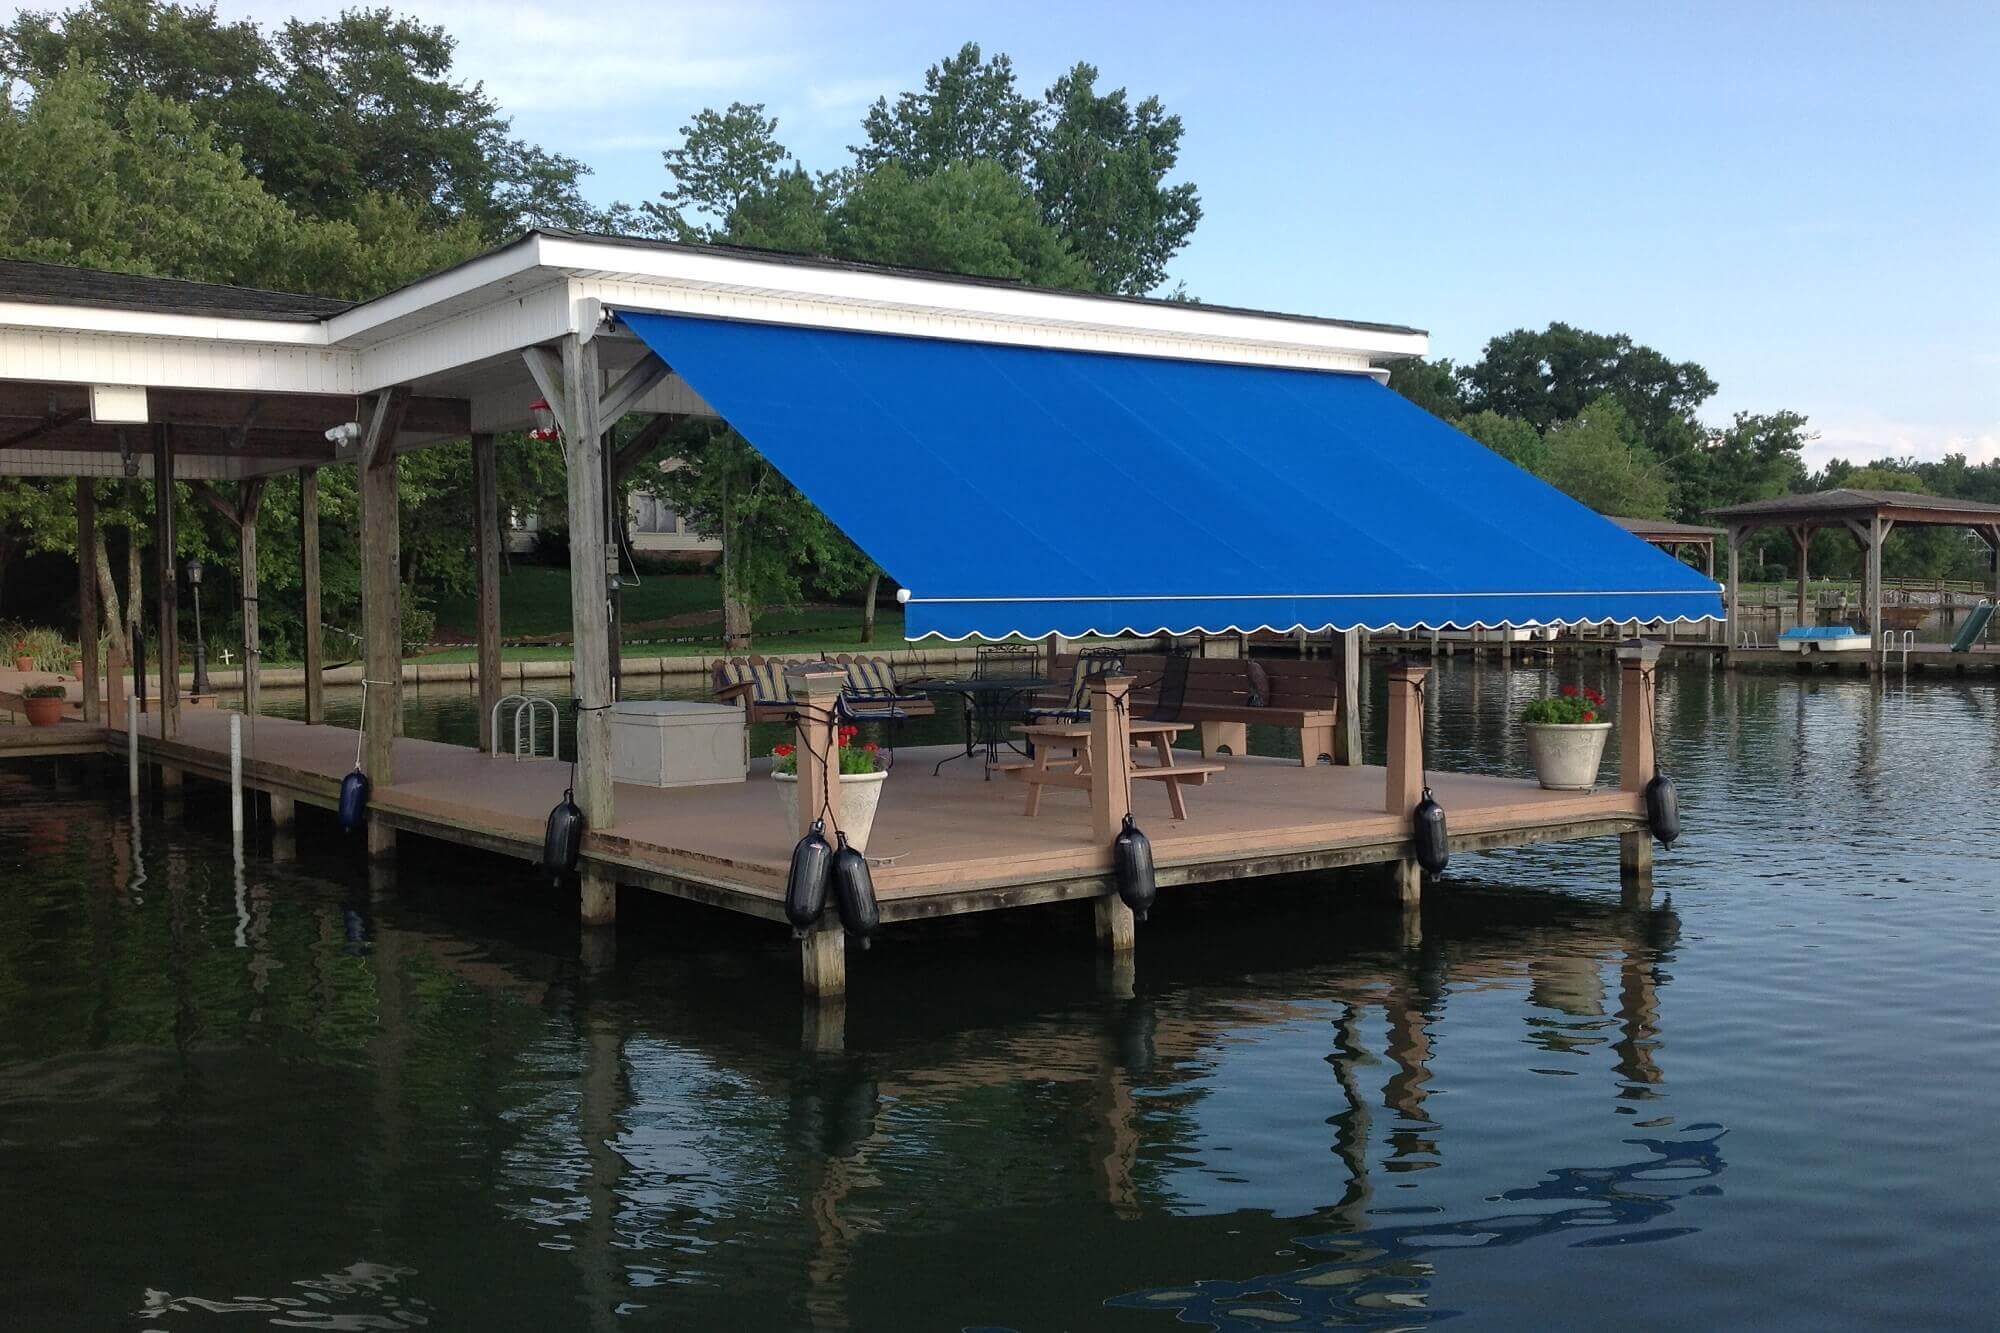 Roma motorized lateral arm retractable awning